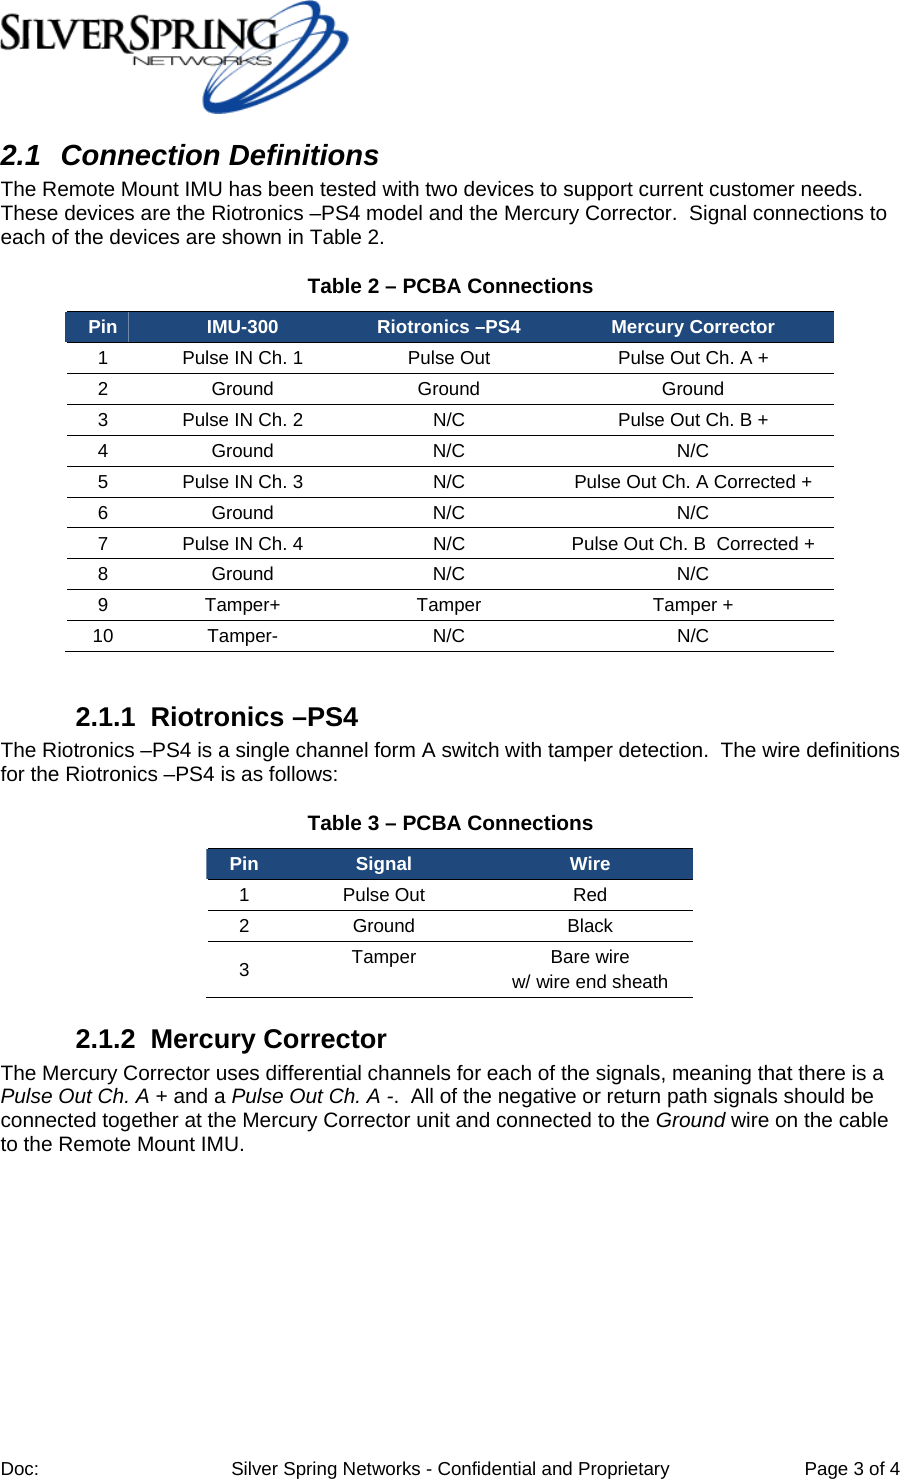   Doc:    Silver Spring Networks - Confidential and Proprietary   Page 3 of 4     2.1 Connection Definitions The Remote Mount IMU has been tested with two devices to support current customer needs. These devices are the Riotronics –PS4 model and the Mercury Corrector.  Signal connections to each of the devices are shown in Table 2. Table 2 – PCBA Connections Pin  IMU-300  Riotronics –PS4  Mercury Corrector 1  Pulse IN Ch. 1  Pulse Out  Pulse Out Ch. A + 2 Ground  Ground  Ground 3  Pulse IN Ch. 2  N/C  Pulse Out Ch. B + 4 Ground  N/C  N/C 5  Pulse IN Ch. 3   N/C  Pulse Out Ch. A Corrected + 6 Ground  N/C  N/C 7  Pulse IN Ch. 4    N/C  Pulse Out Ch. B  Corrected + 8 Ground  N/C  N/C 9 Tamper+  Tamper  Tamper + 10 Tamper-  N/C  N/C  2.1.1 Riotronics –PS4 The Riotronics –PS4 is a single channel form A switch with tamper detection.  The wire definitions for the Riotronics –PS4 is as follows: Table 3 – PCBA Connections Pin  Signal  Wire 1 Pulse Out  Red 2 Ground  Black 3  Tamper Bare wire  w/ wire end sheath 2.1.2 Mercury Corrector The Mercury Corrector uses differential channels for each of the signals, meaning that there is a Pulse Out Ch. A + and a Pulse Out Ch. A -.  All of the negative or return path signals should be connected together at the Mercury Corrector unit and connected to the Ground wire on the cable to the Remote Mount IMU.